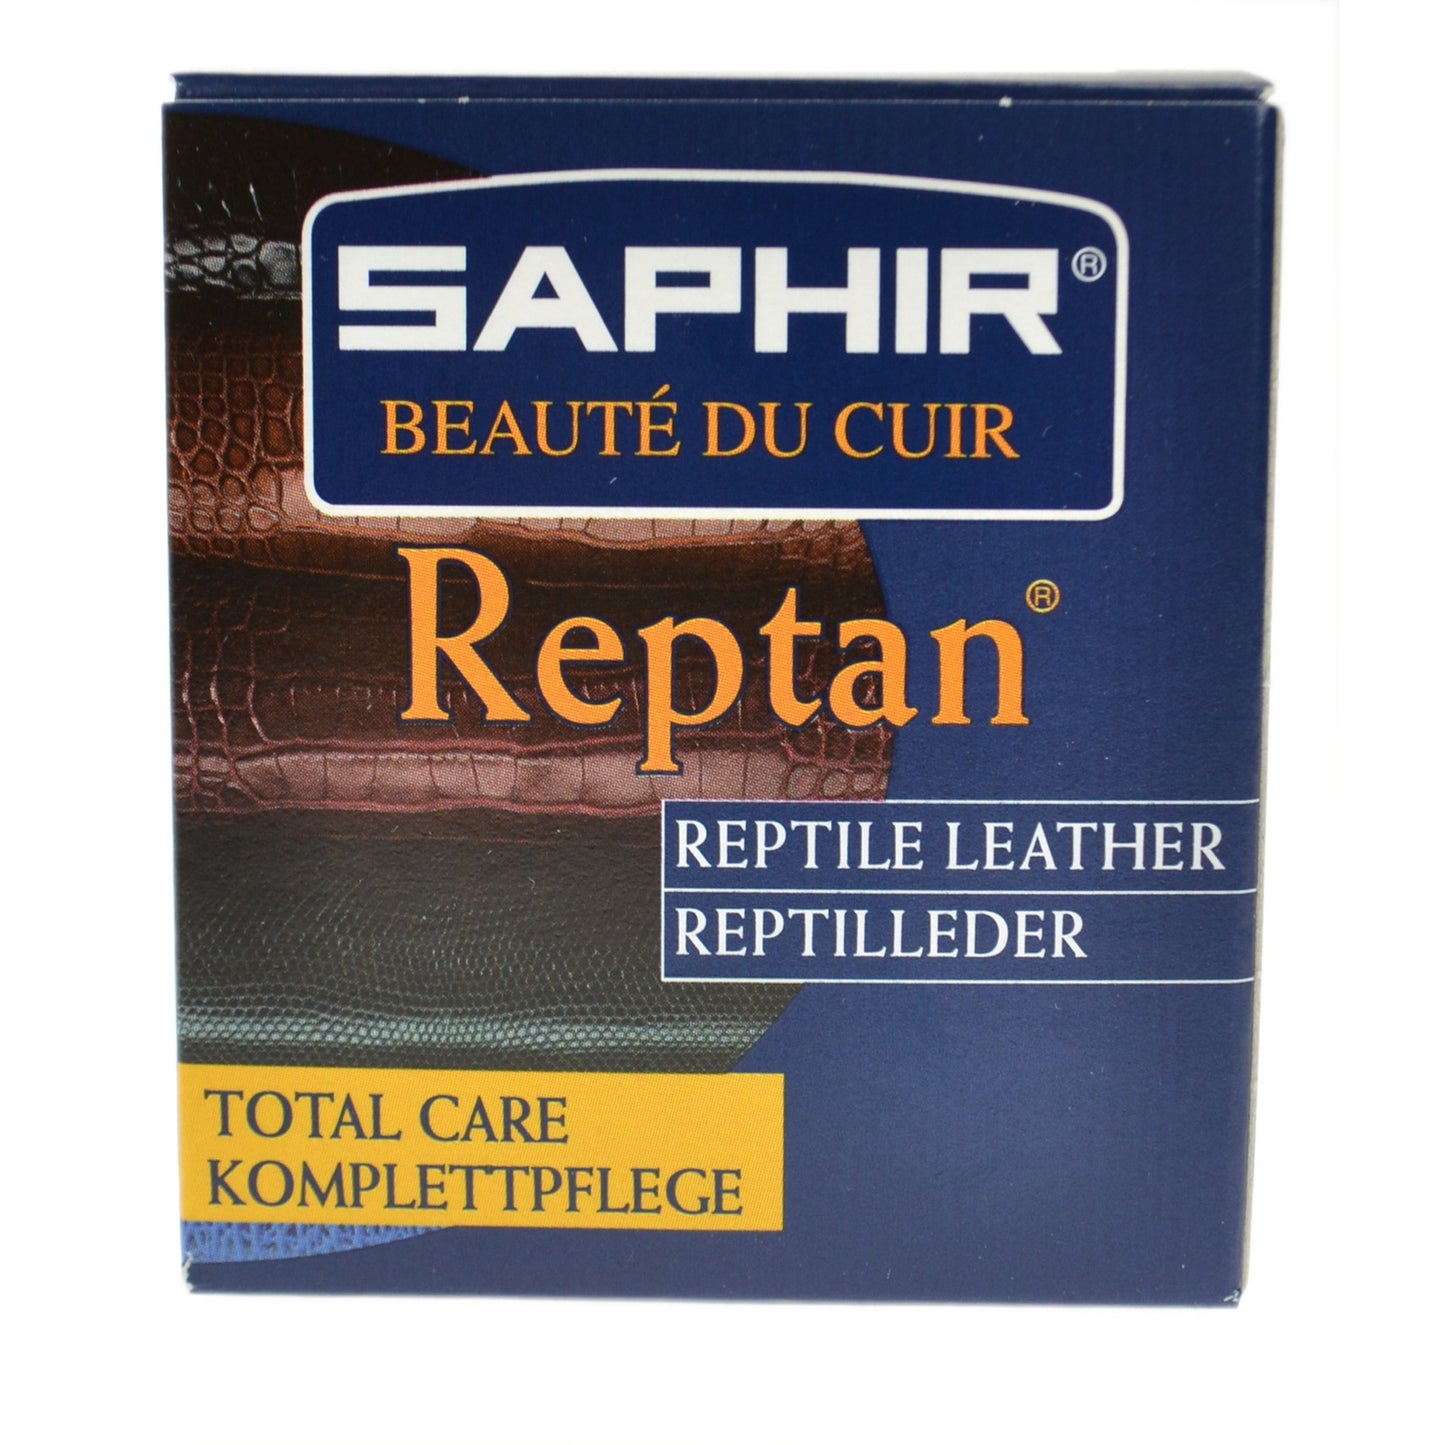 Saphir Reptan Reptile and Marine Leather Protector and Polish - Neutral - 50ml